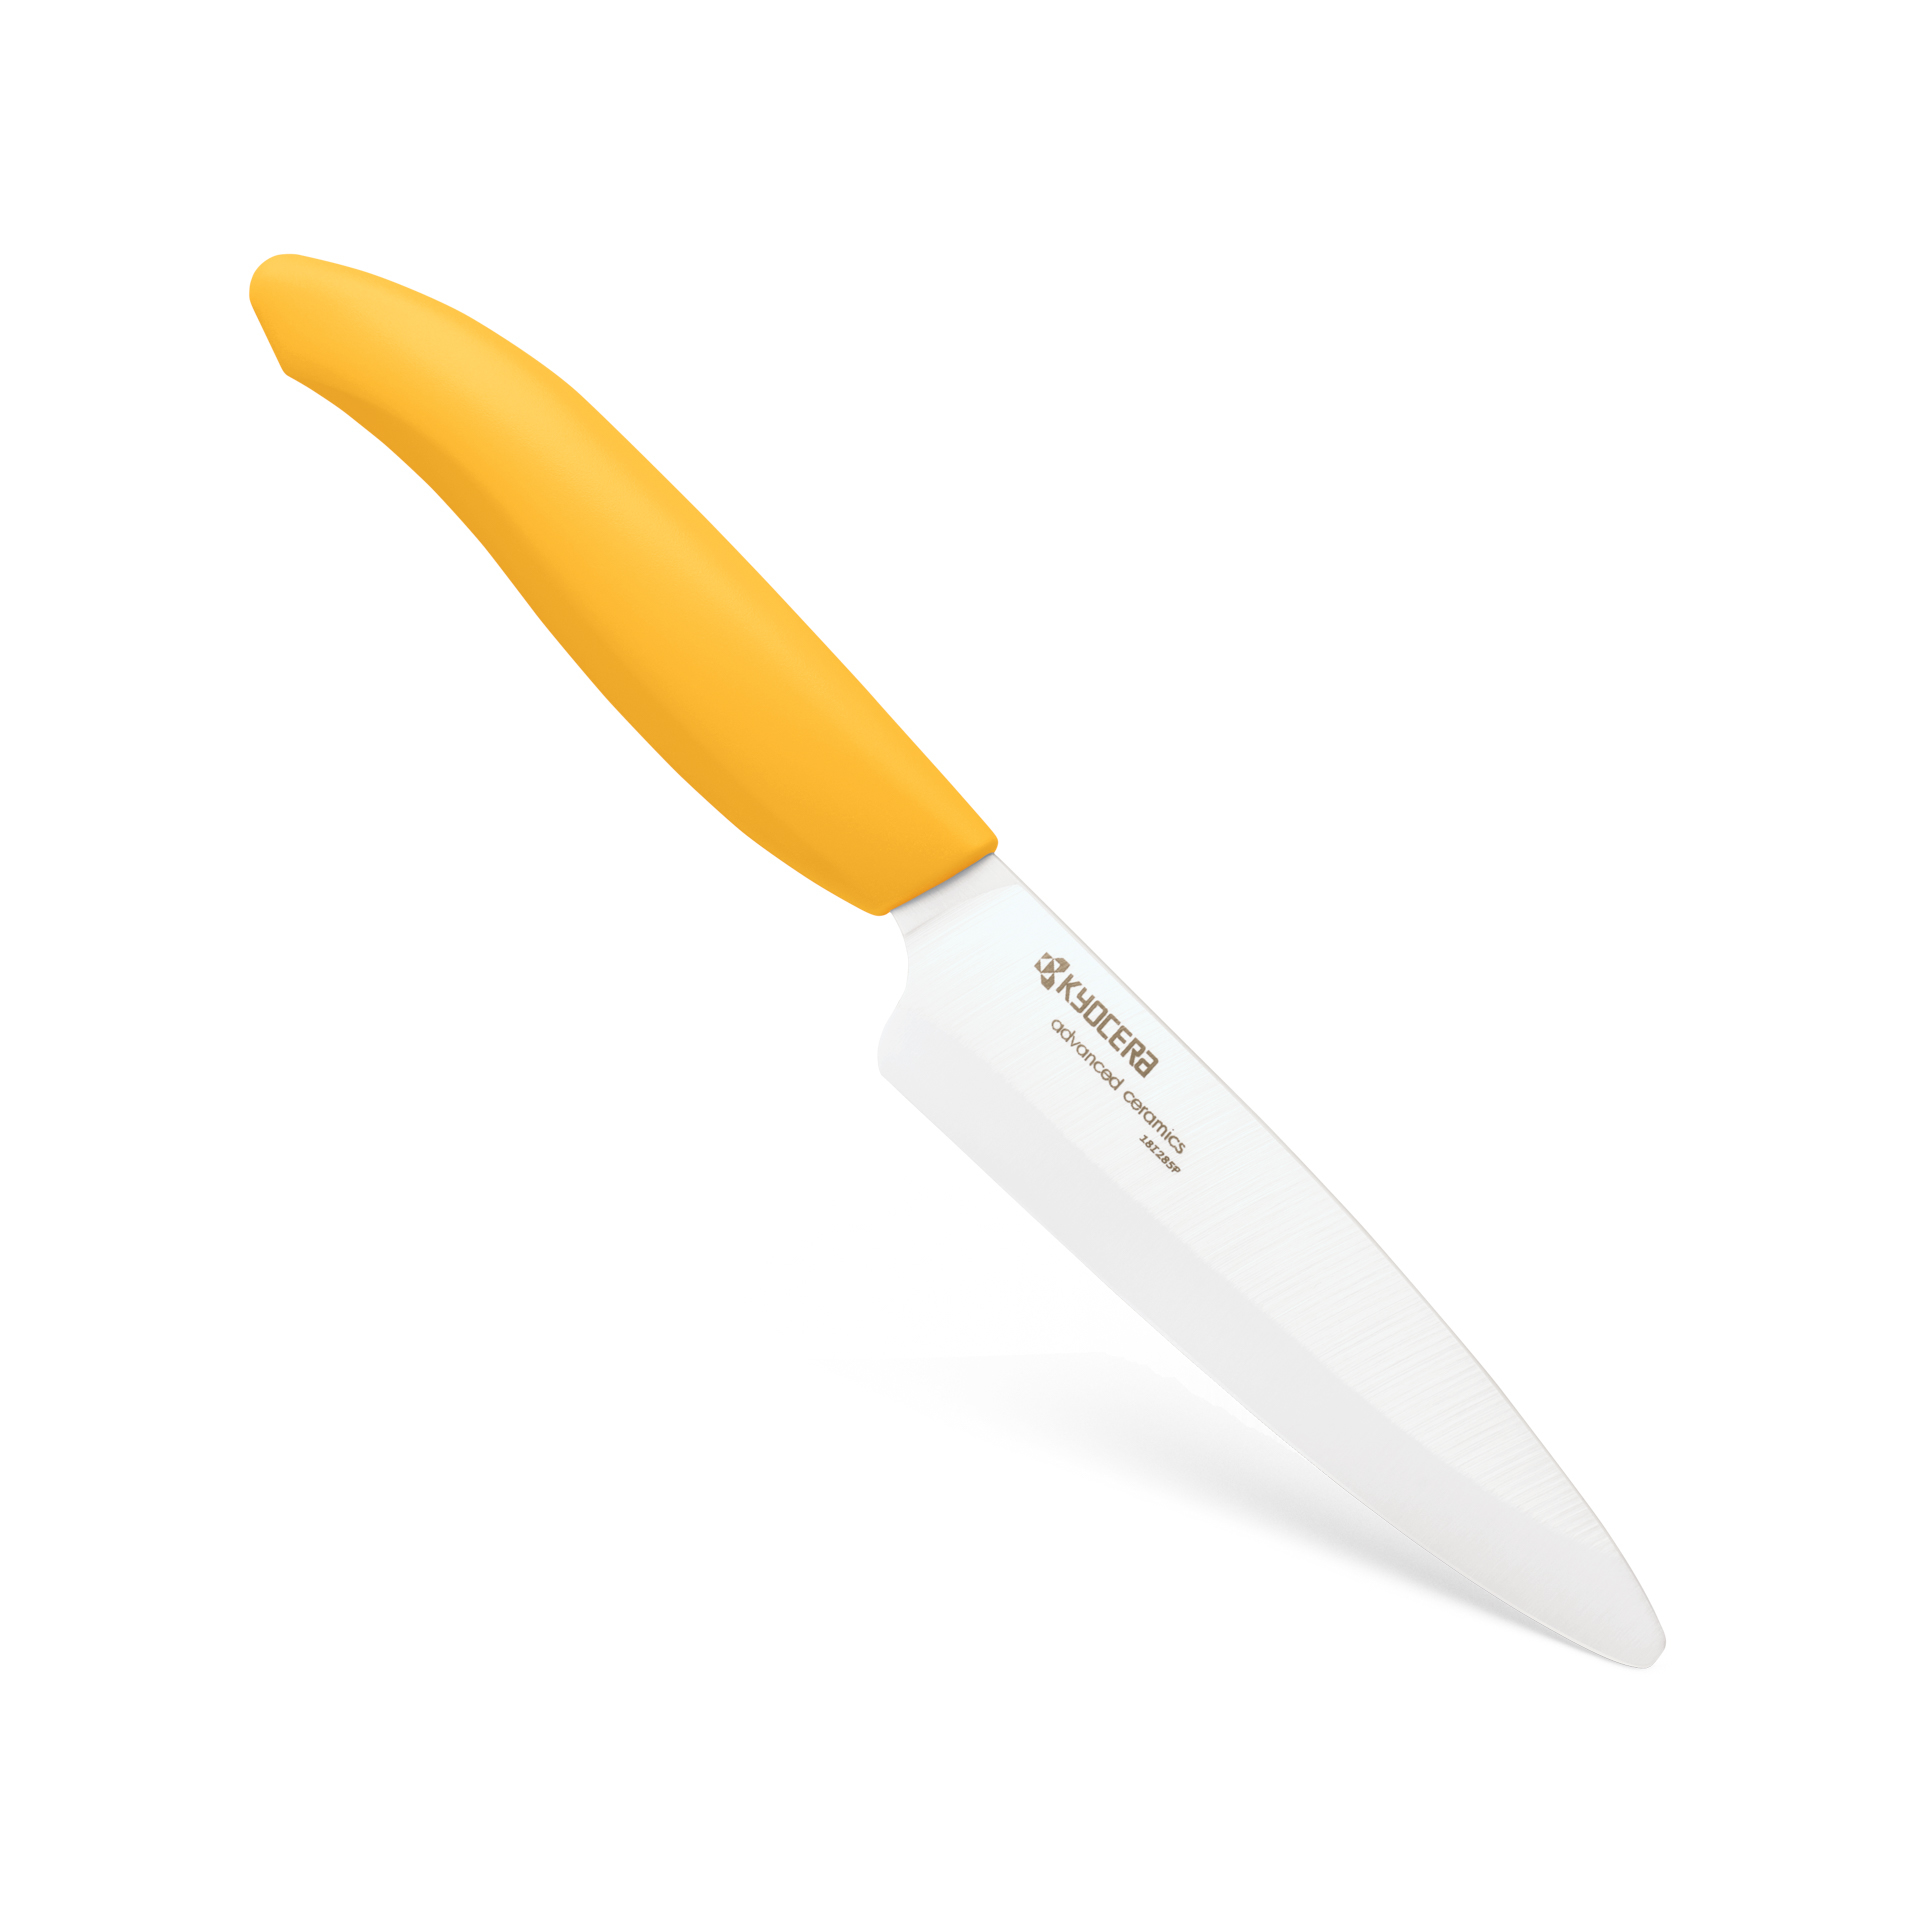 FK-075-WH-BK Ceramic Paring Knife 3 with Black Handle by Kyocera